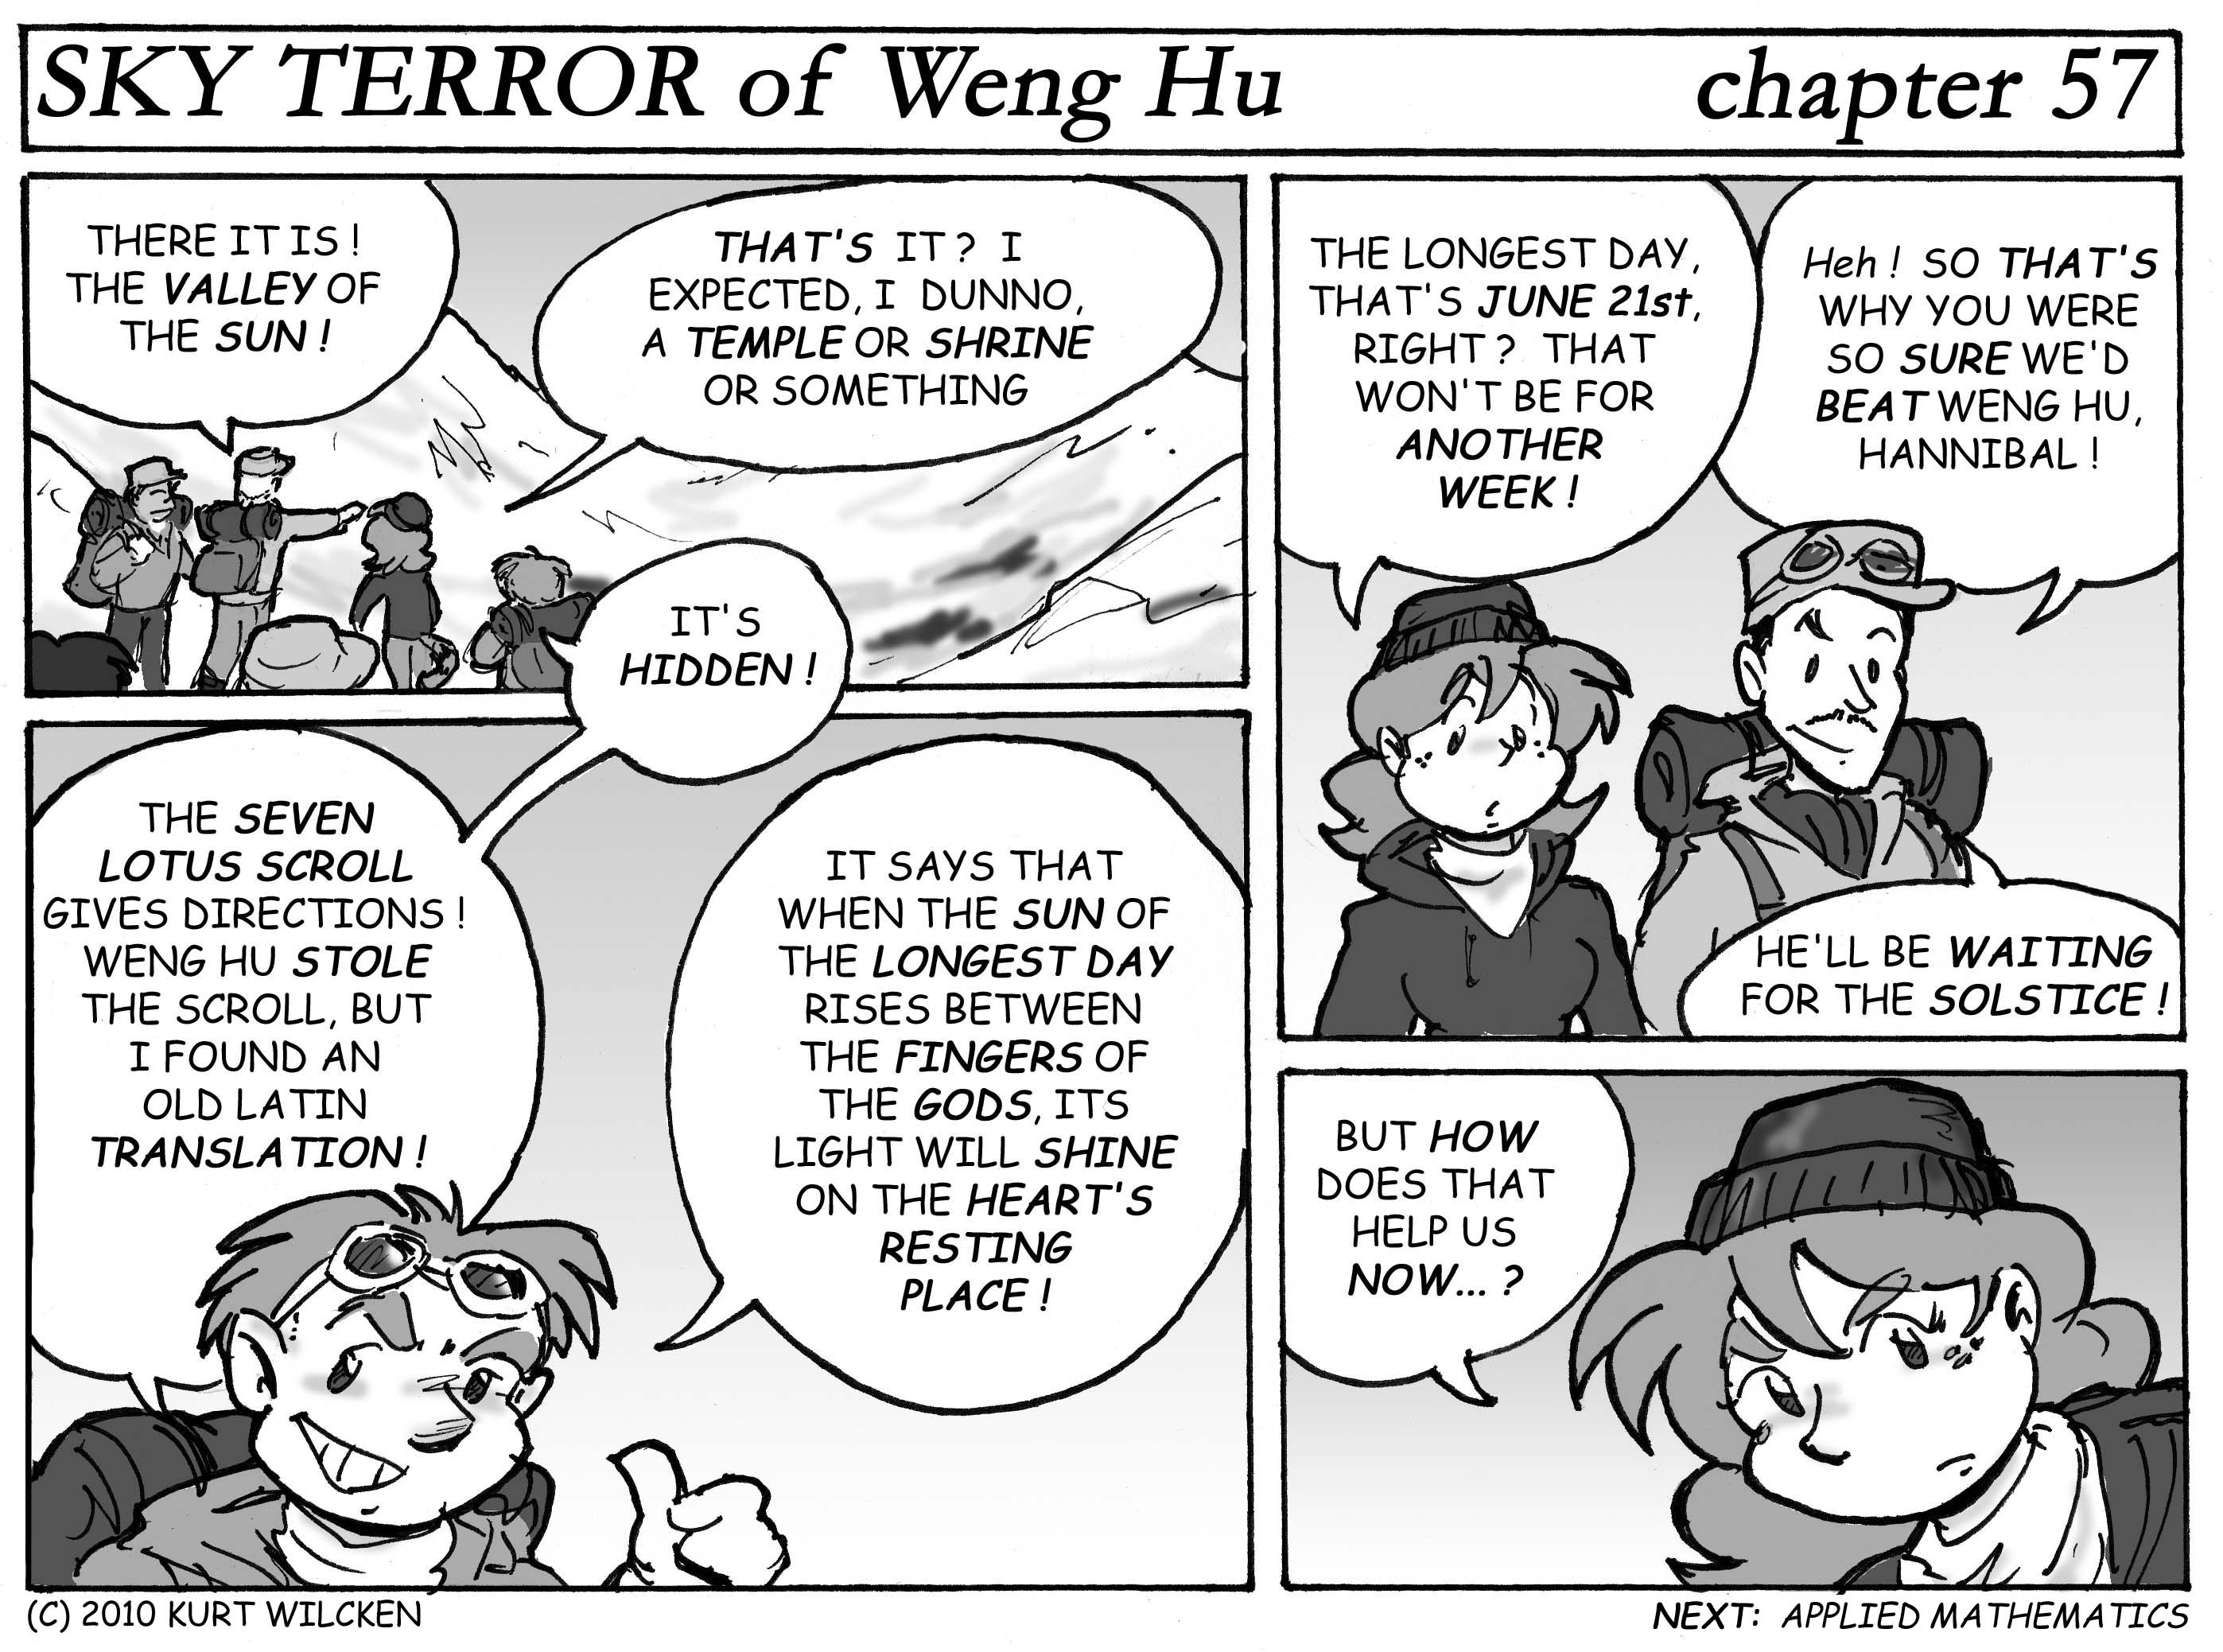 SKY TERROR of Weng Hu:  Chapter 57 — Valley of the Sun